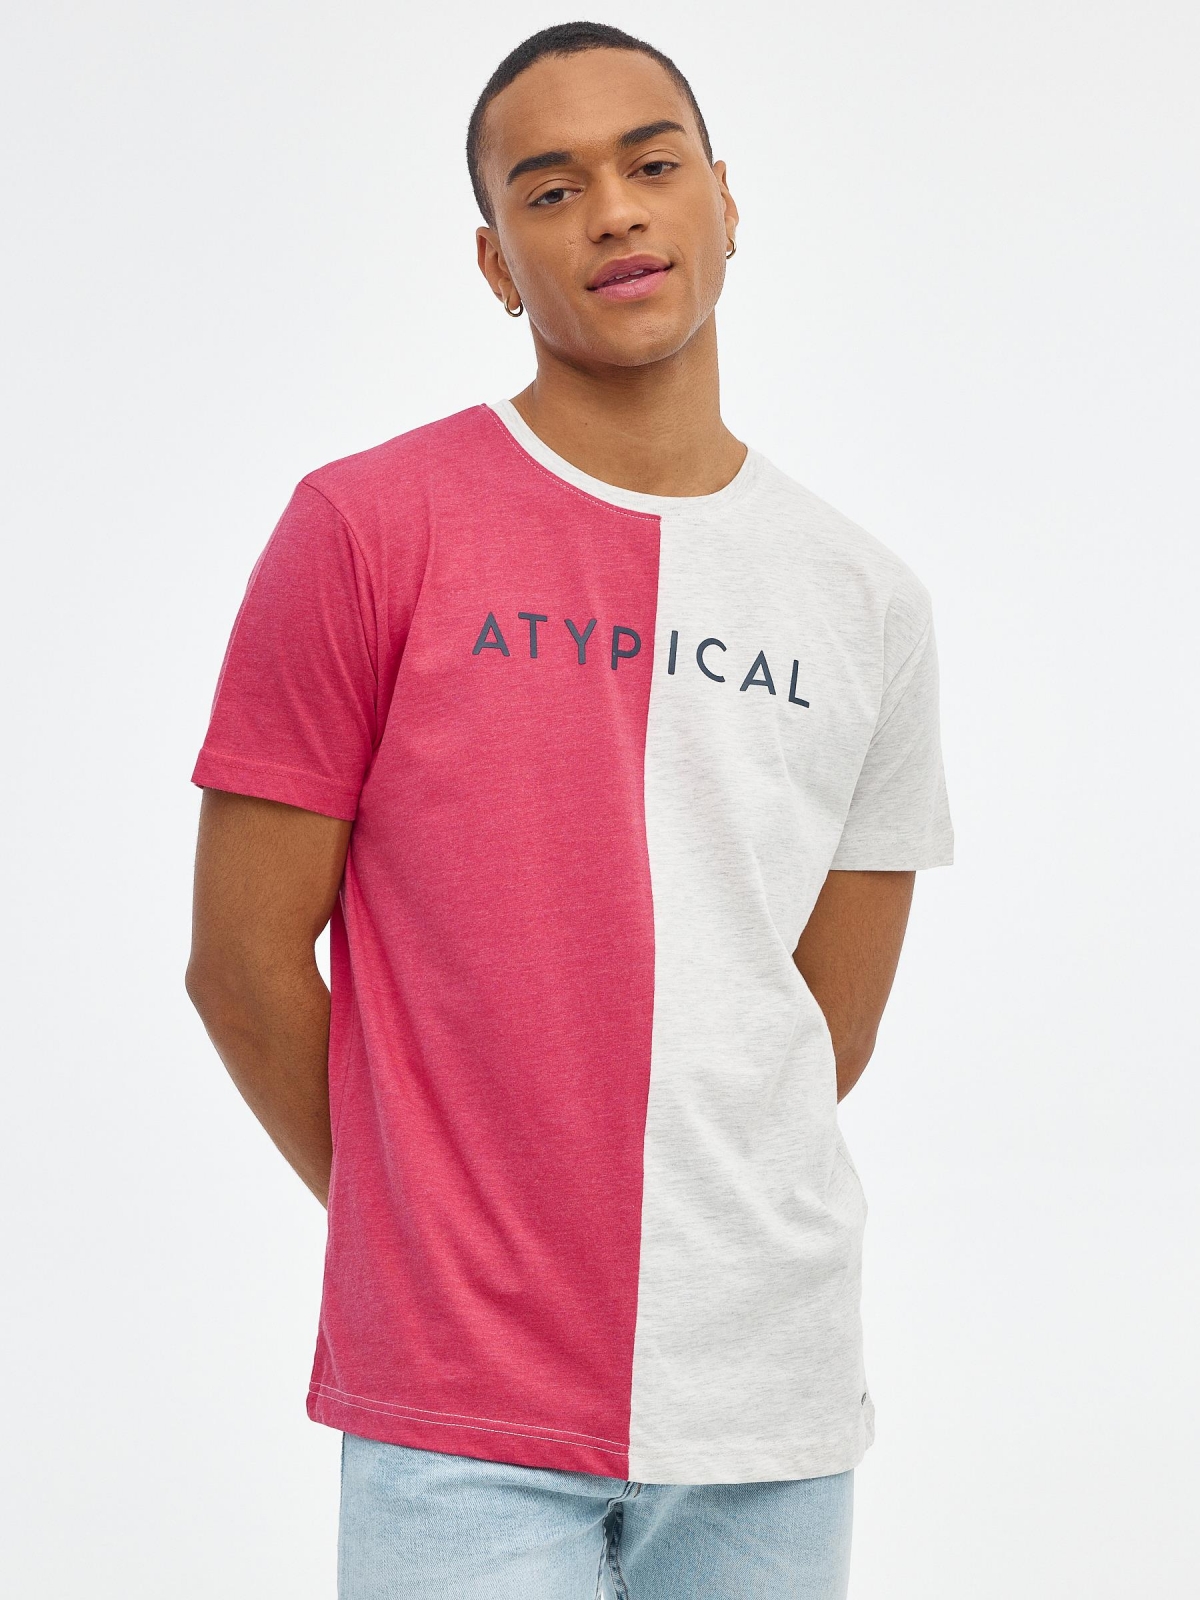 ATYPICAL T-shirt red middle front view